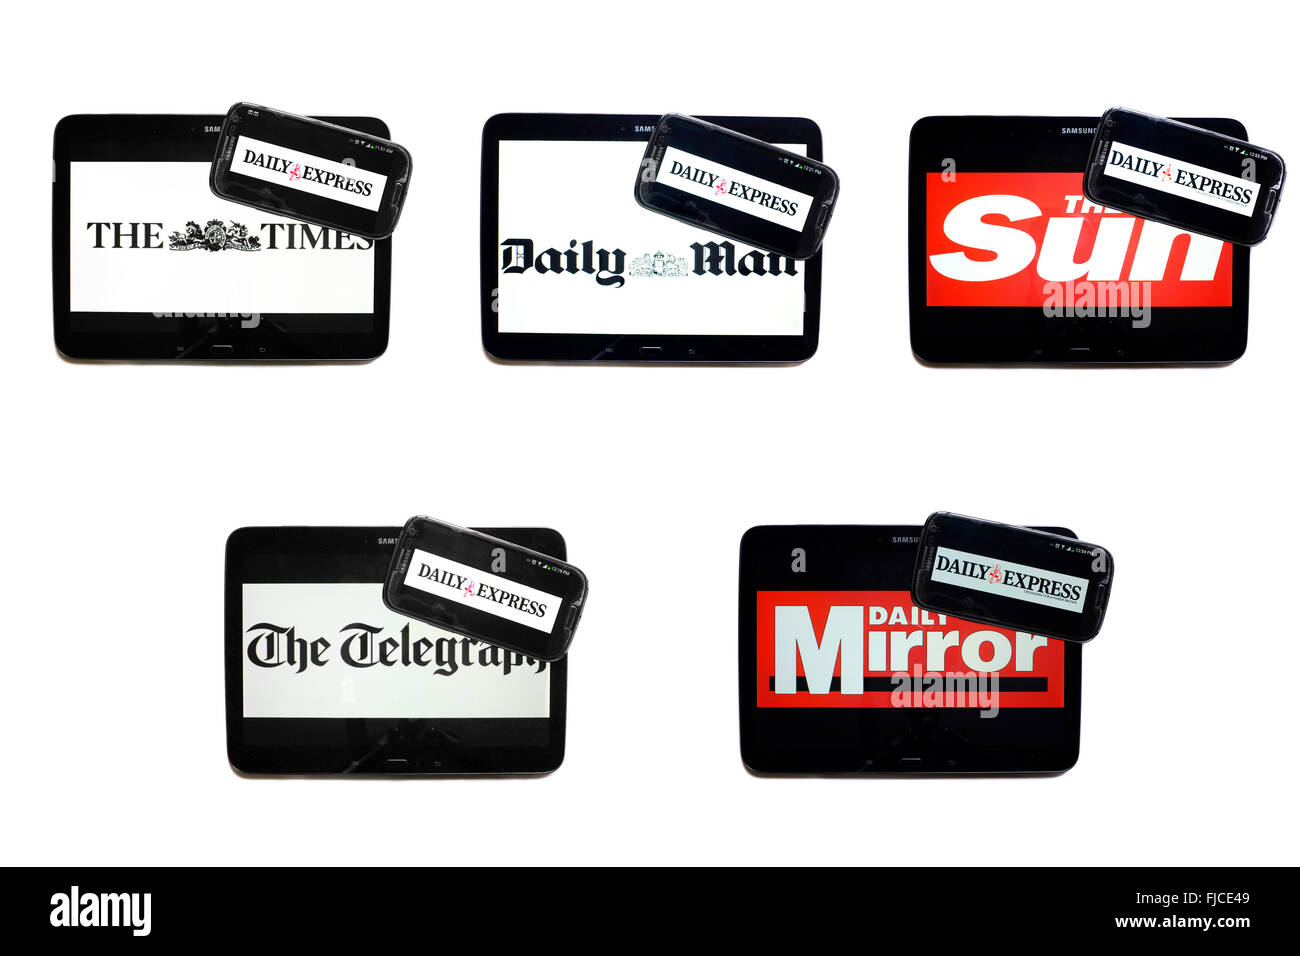 The Daily Express newspaper logo on smartphone screens surrounded by tablets displaying the logos of rival newspapers. Stock Photo